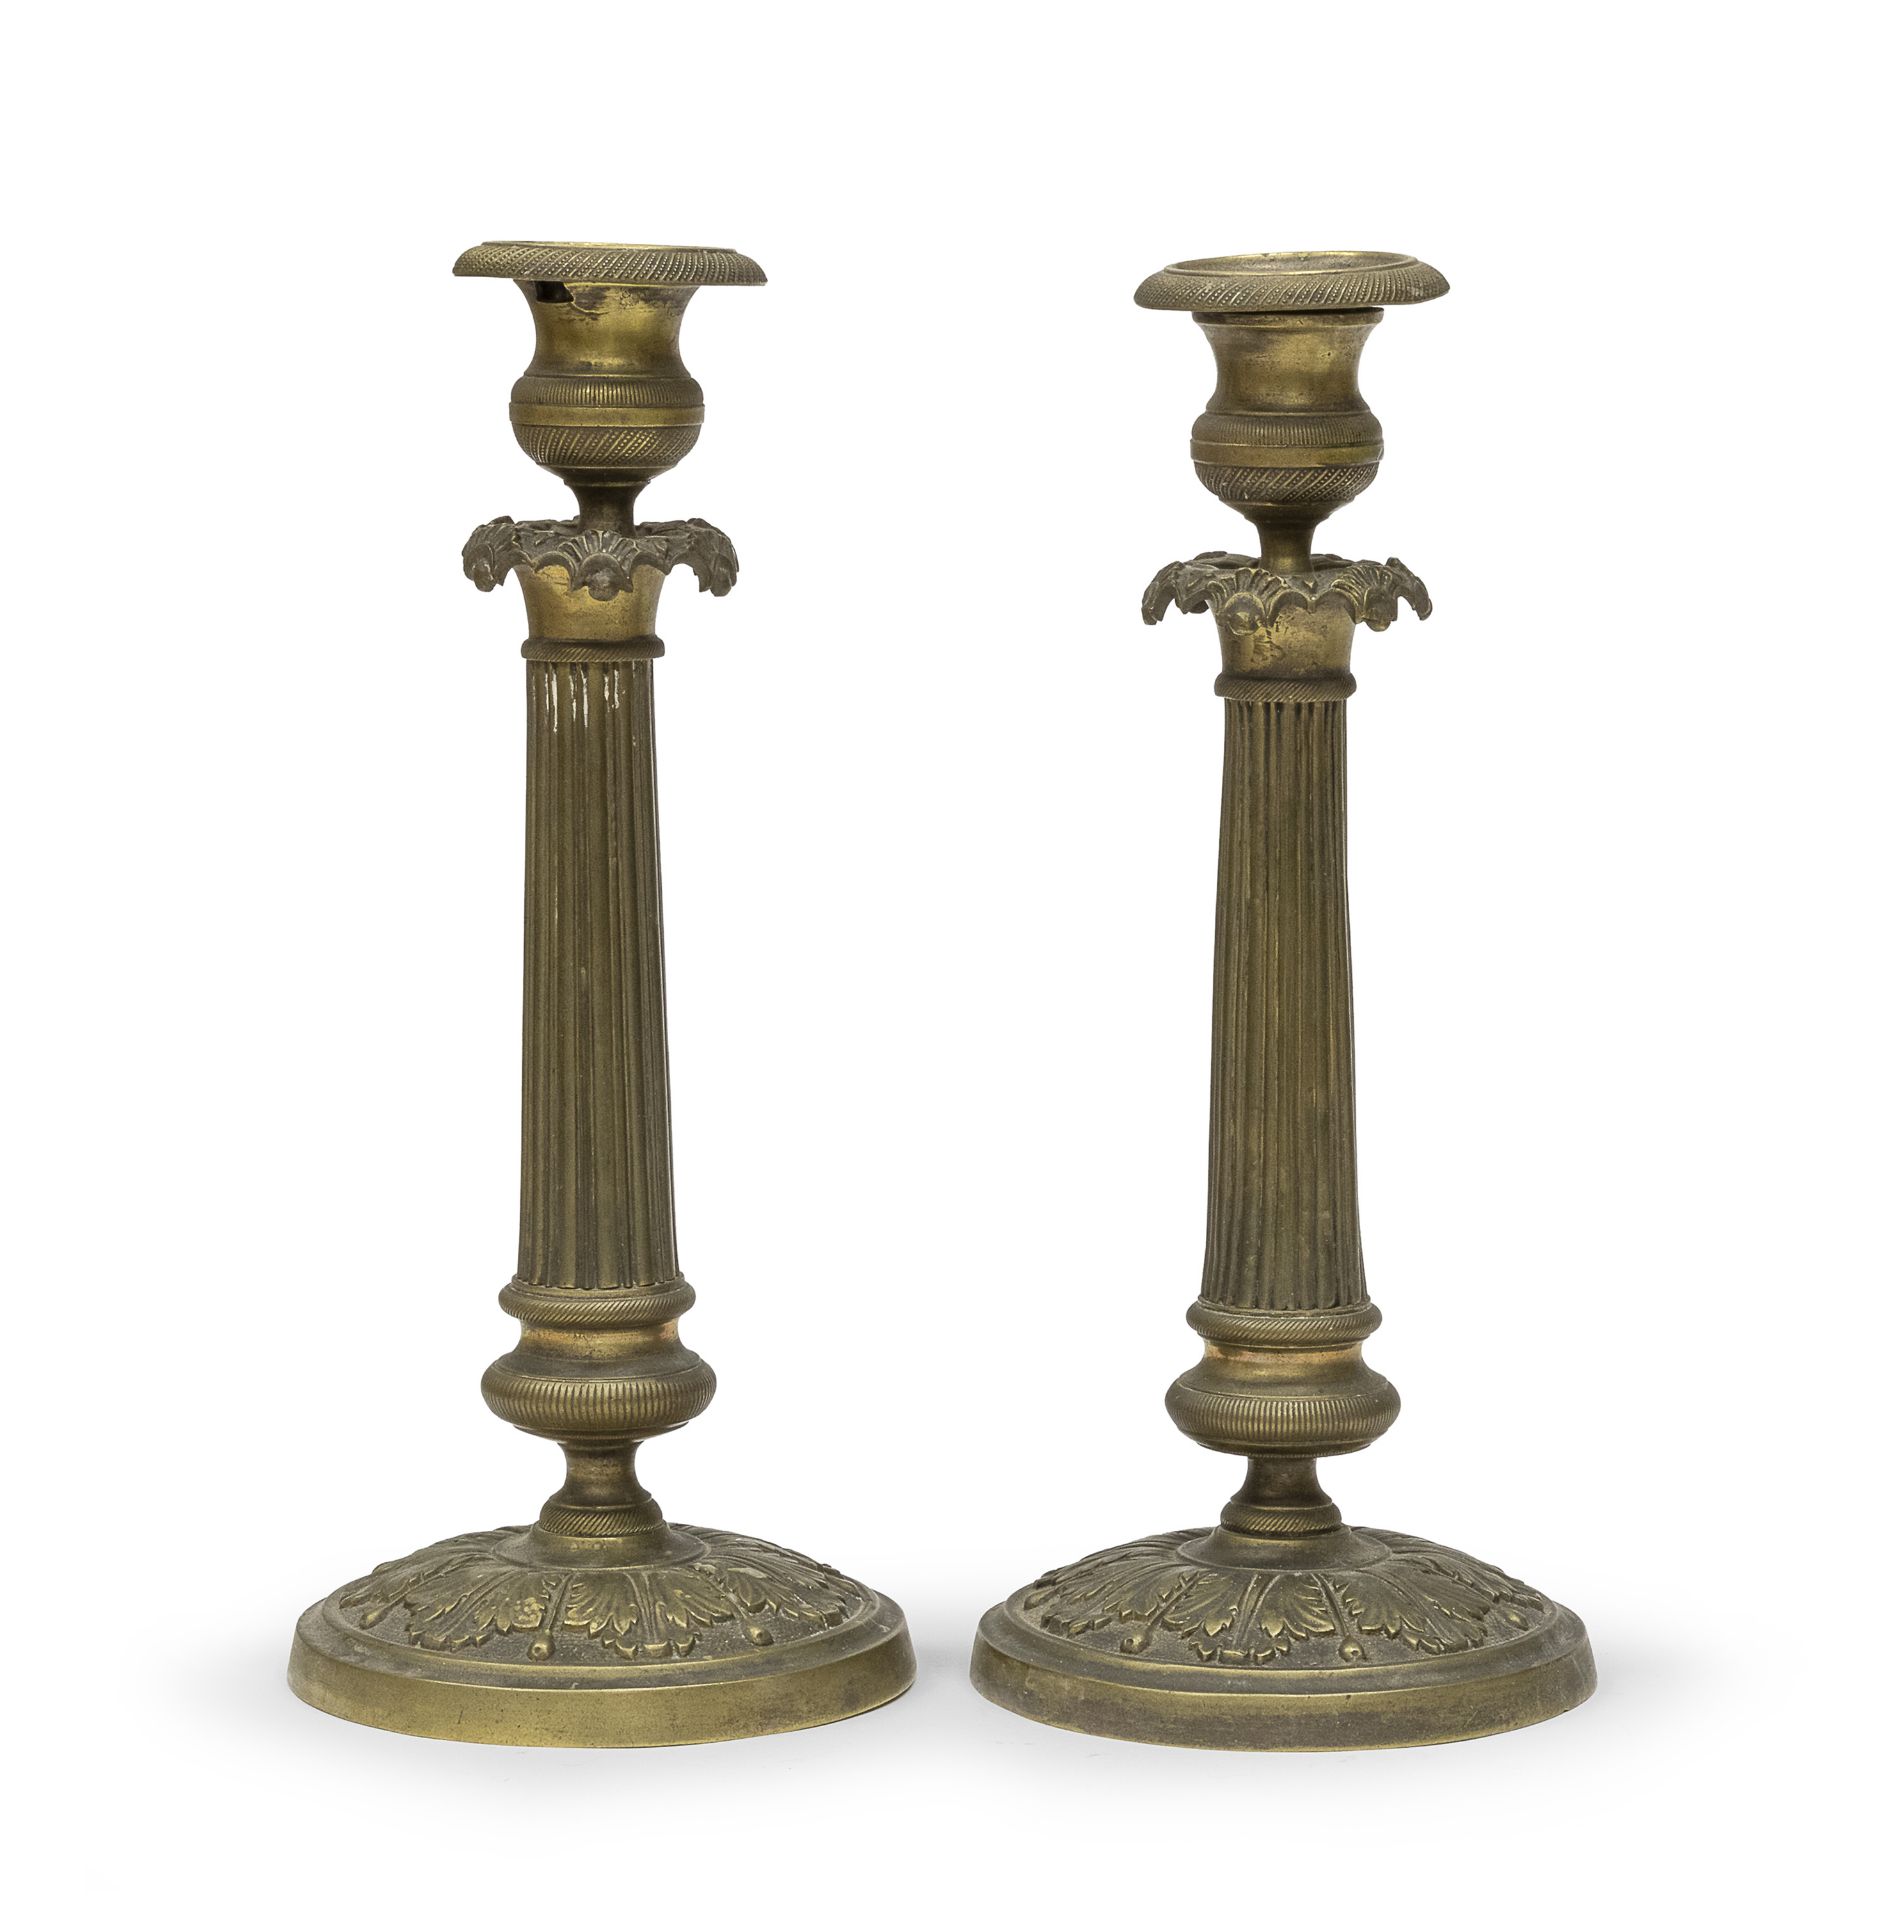 PAIR OF BRONZE CANDLESTICKS EARLY 19TH CENTURY